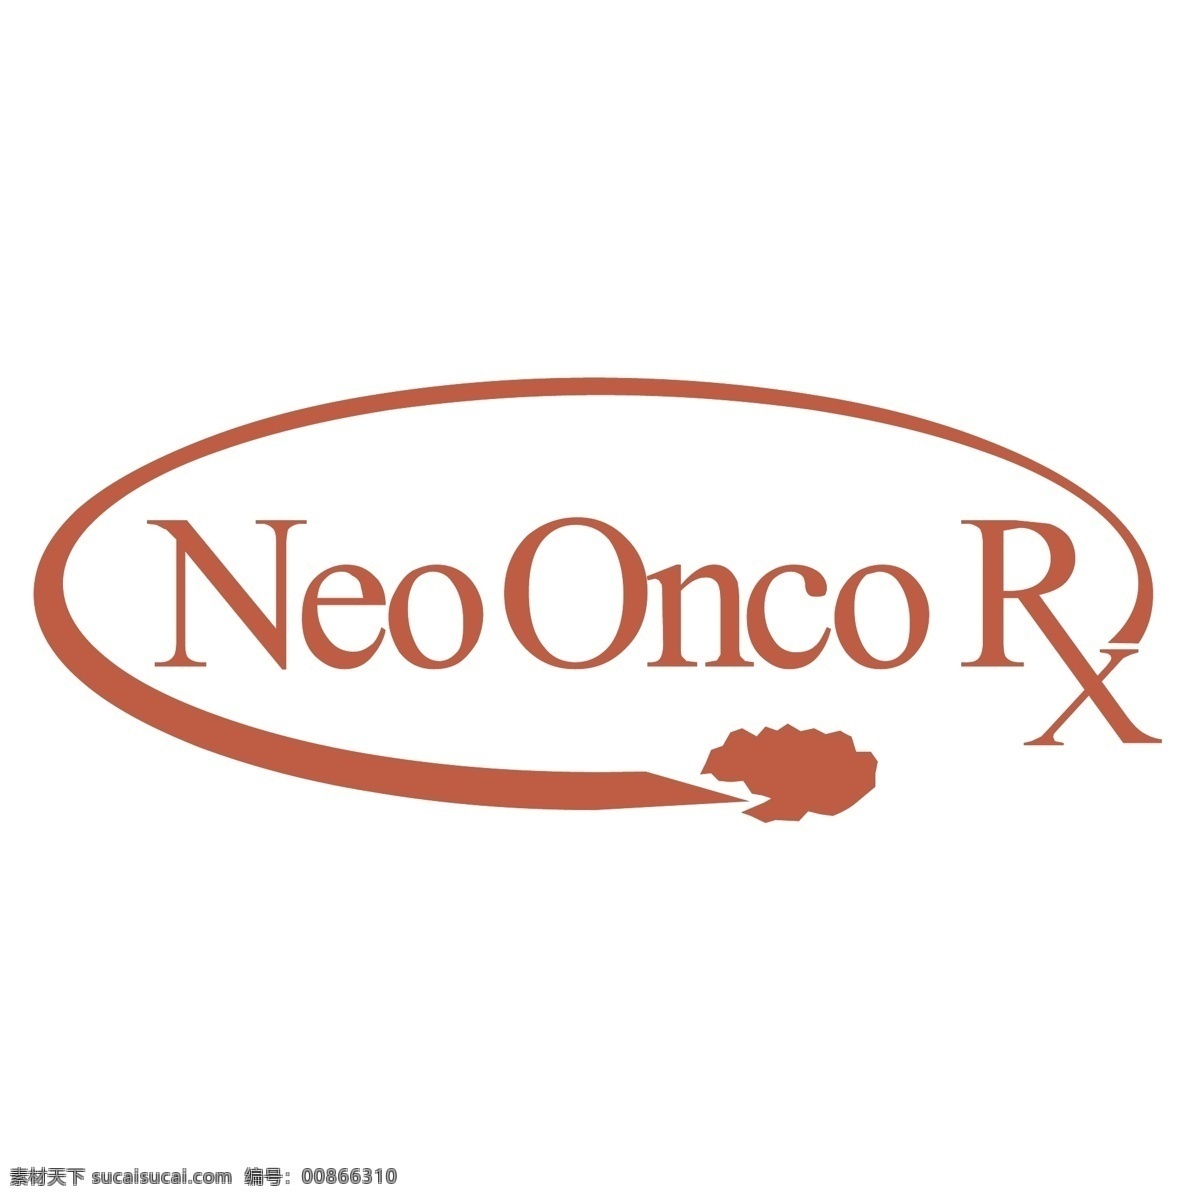 neoonco rx 白色